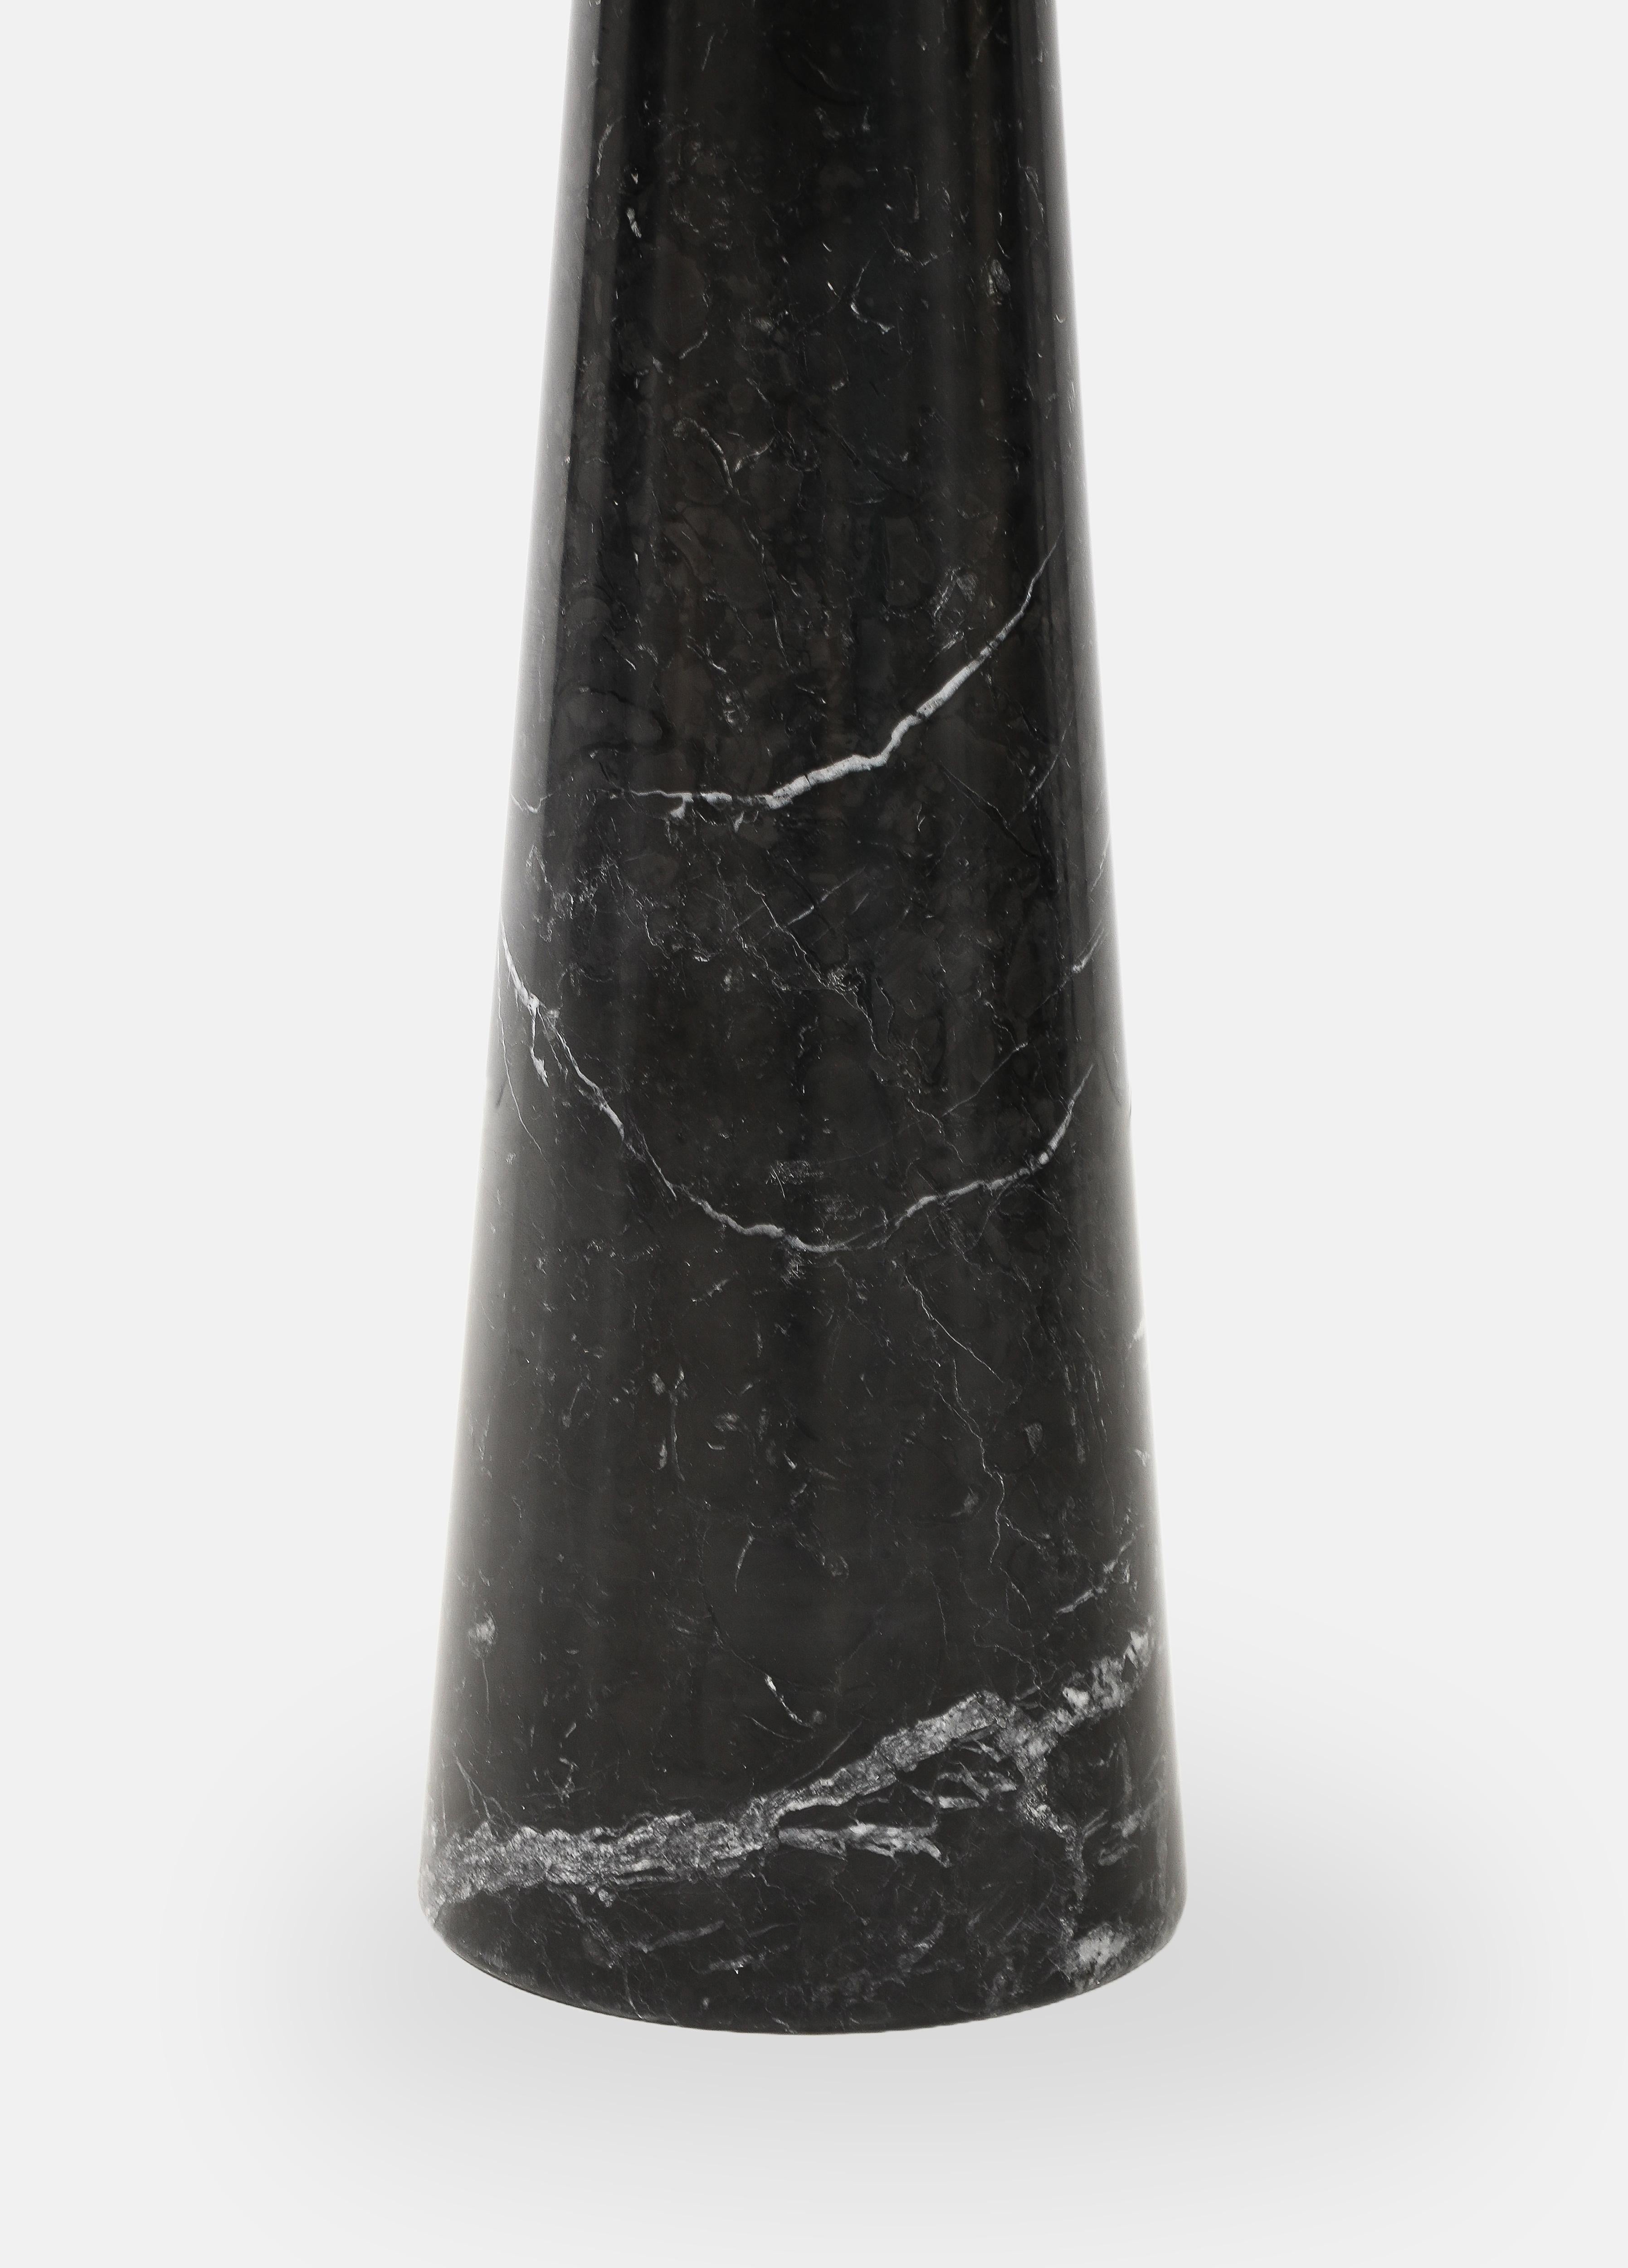 Angelo Mangiarotti Nero Marquina Marble Tall Side Table from Eros Series, 1971 For Sale 1